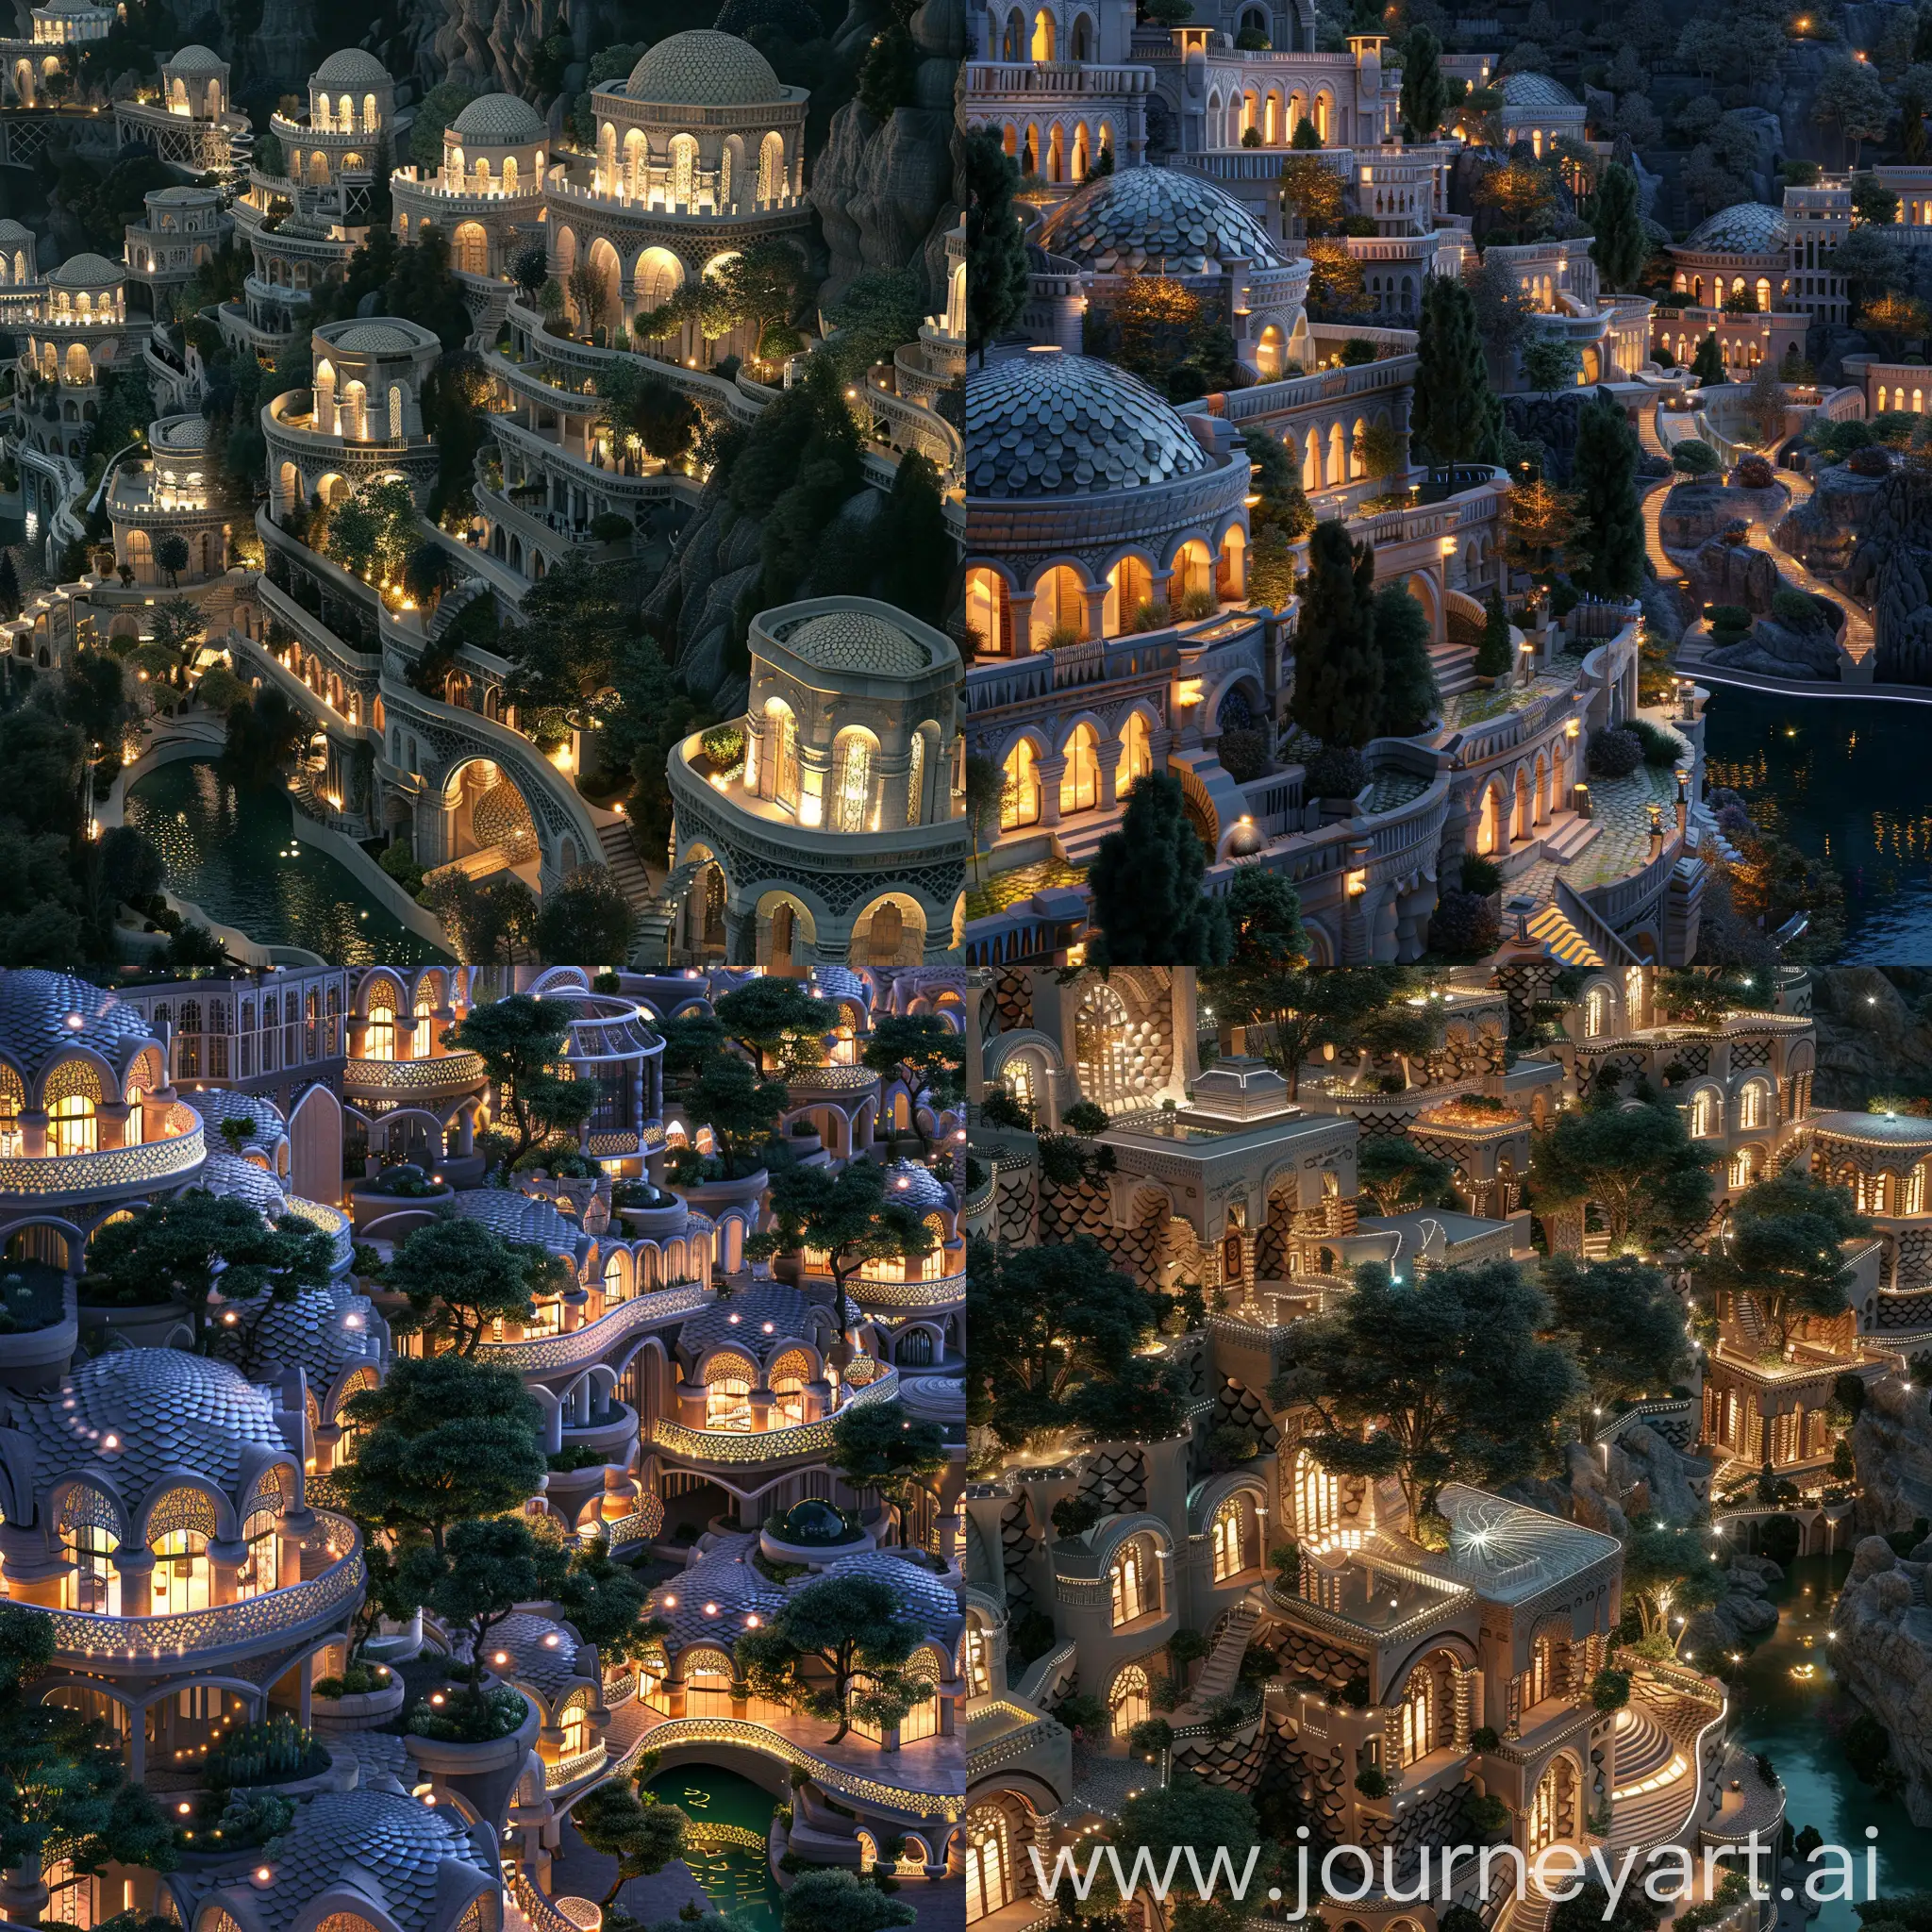 Beautiful futuristic metropolis in an alternate timeline where all buildings retain traditional elements, ornate travertine architecture with scale-like patterns on facades and illuminated trees, buildings are terraced, spring, canals, aerial photograph